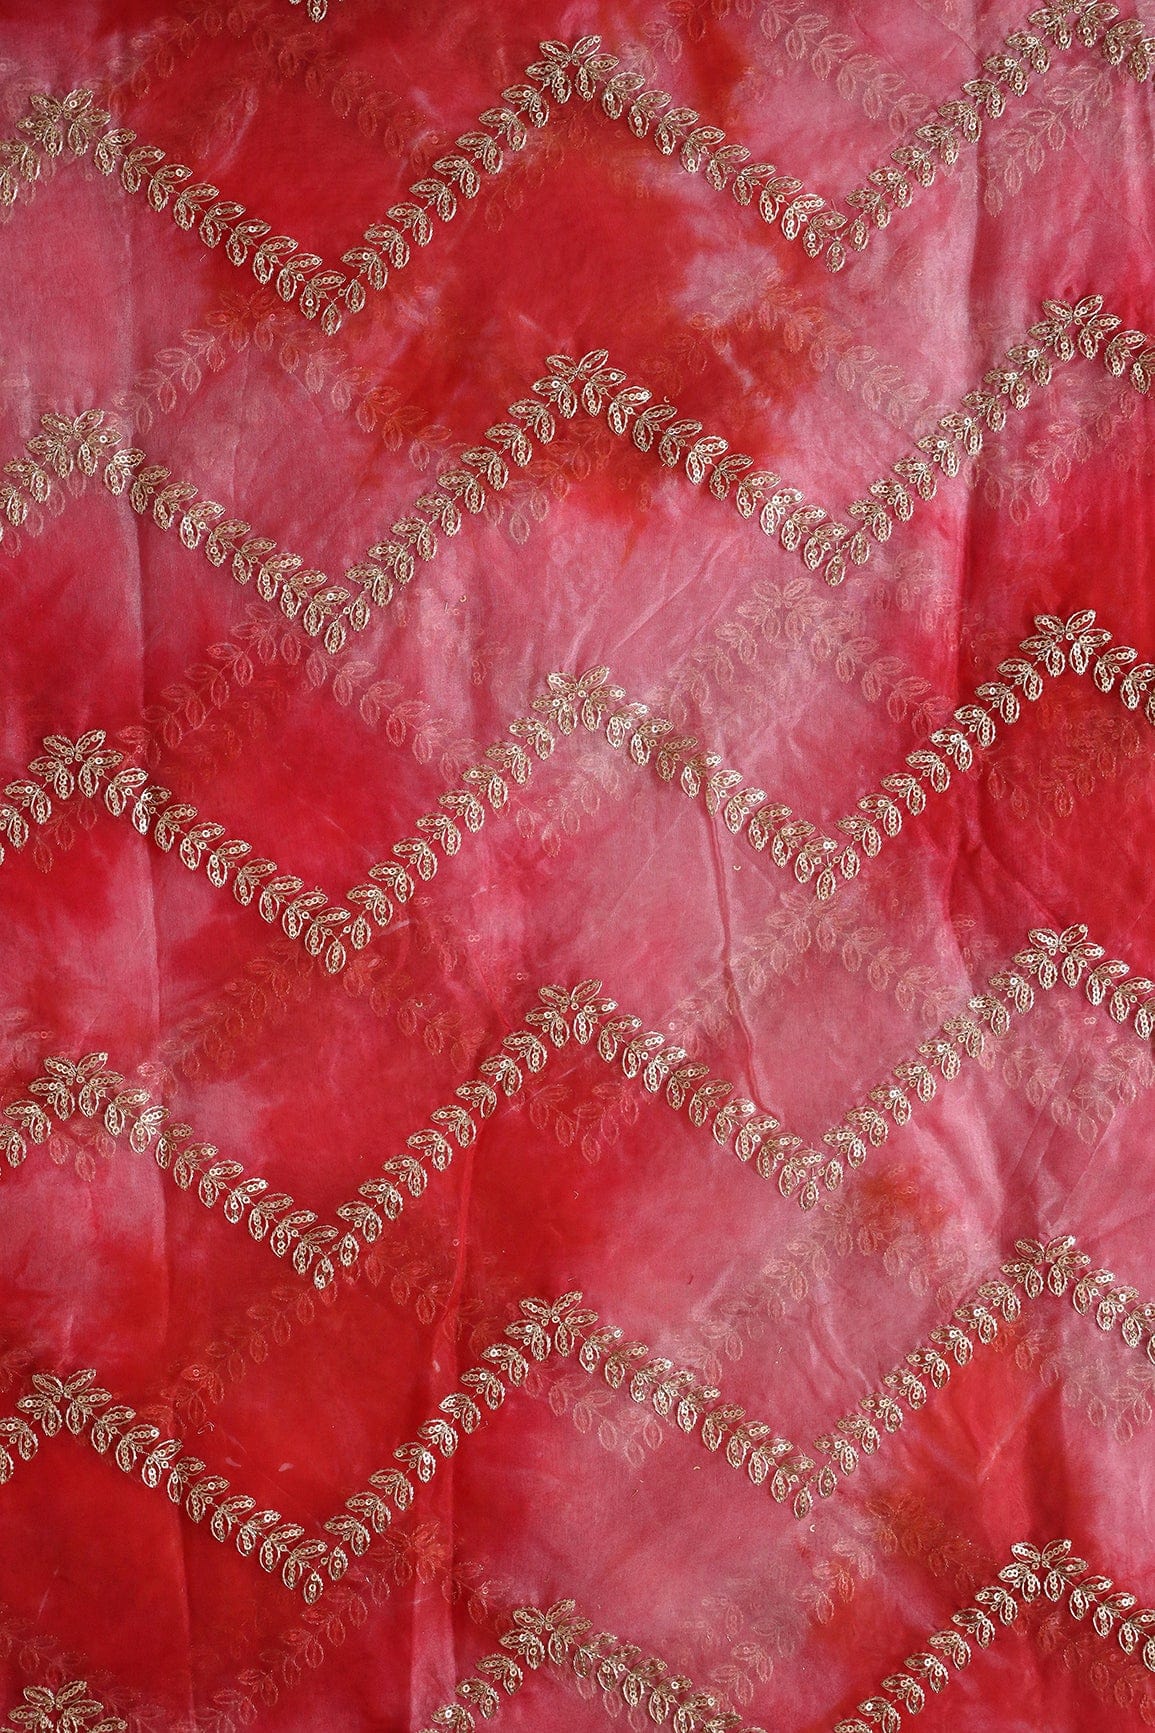 doeraa Embroidery Fabrics Gold Zari With Gold Sequins Chevron Embroidery Work On Tie & Dye Red Organza Fabric